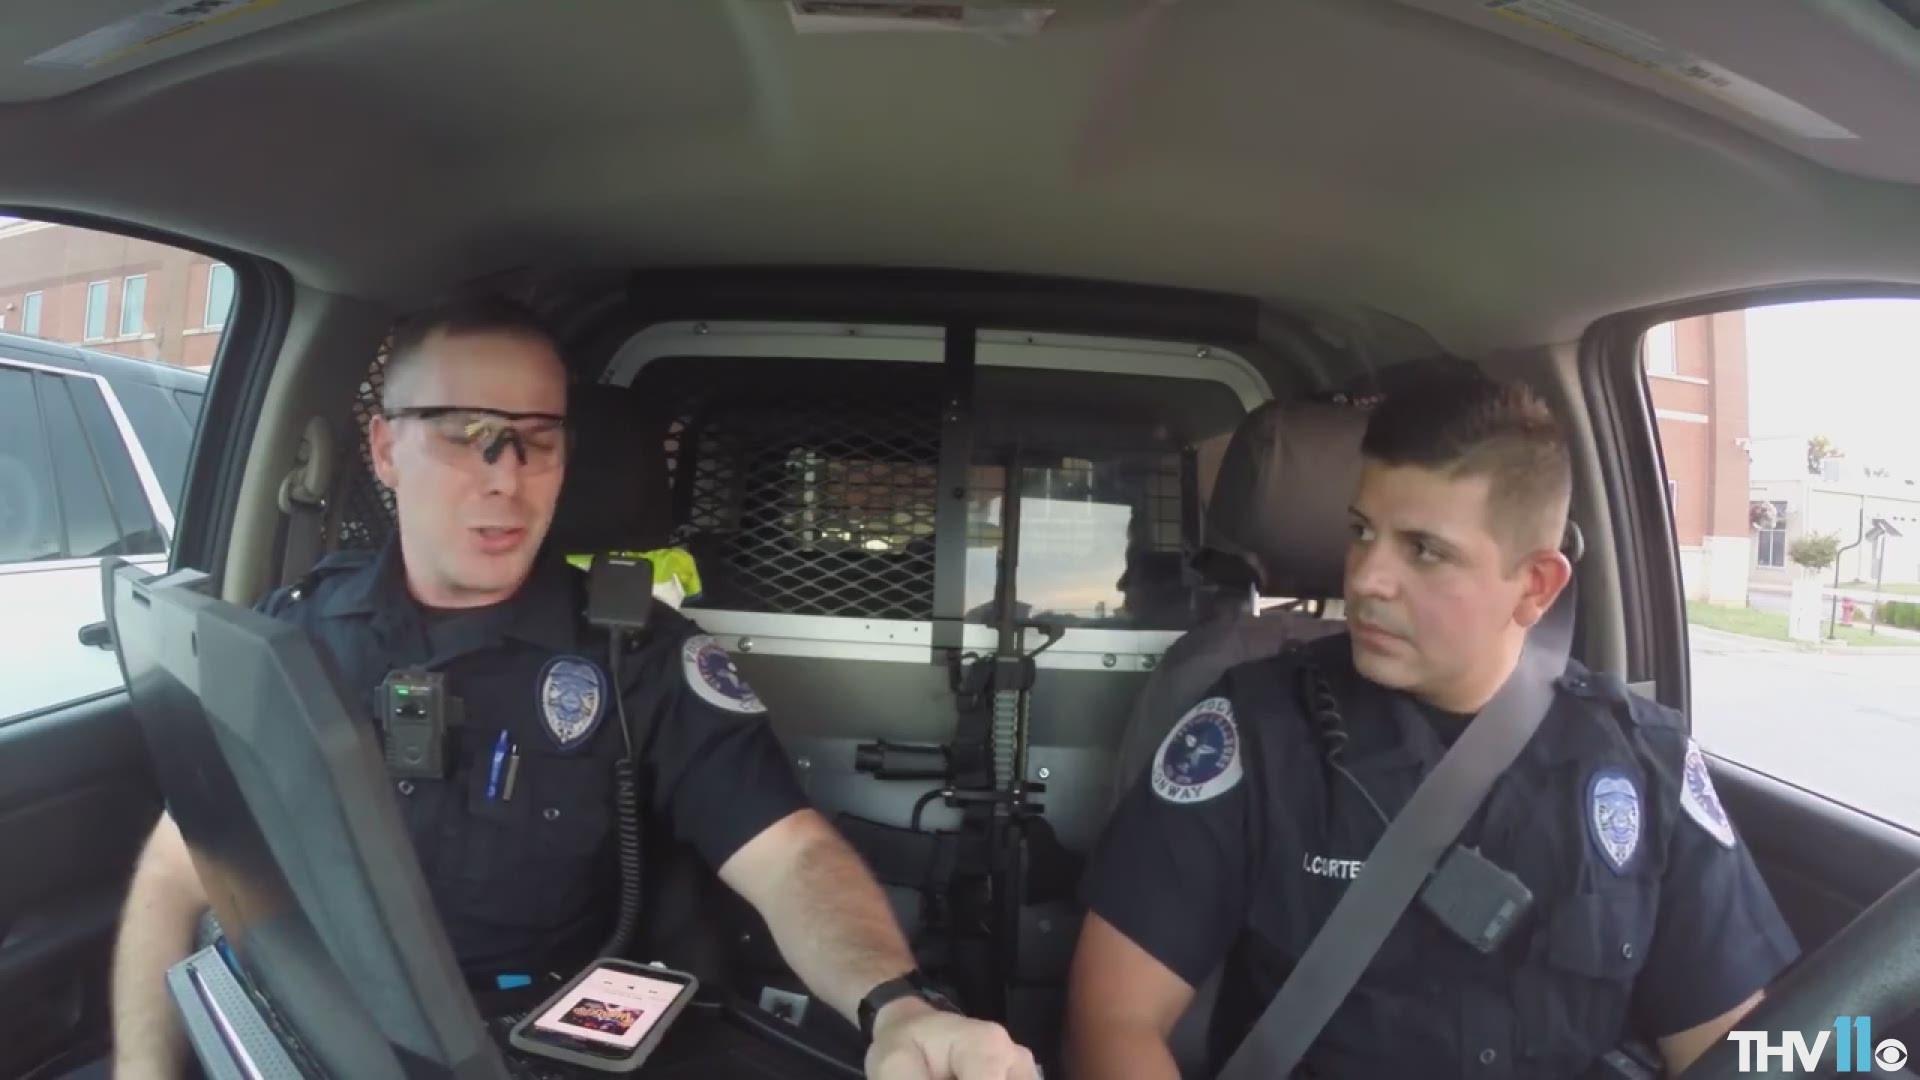 Officers Danny Worley and Ivan Cortez battle each other in this lip-sync challenge